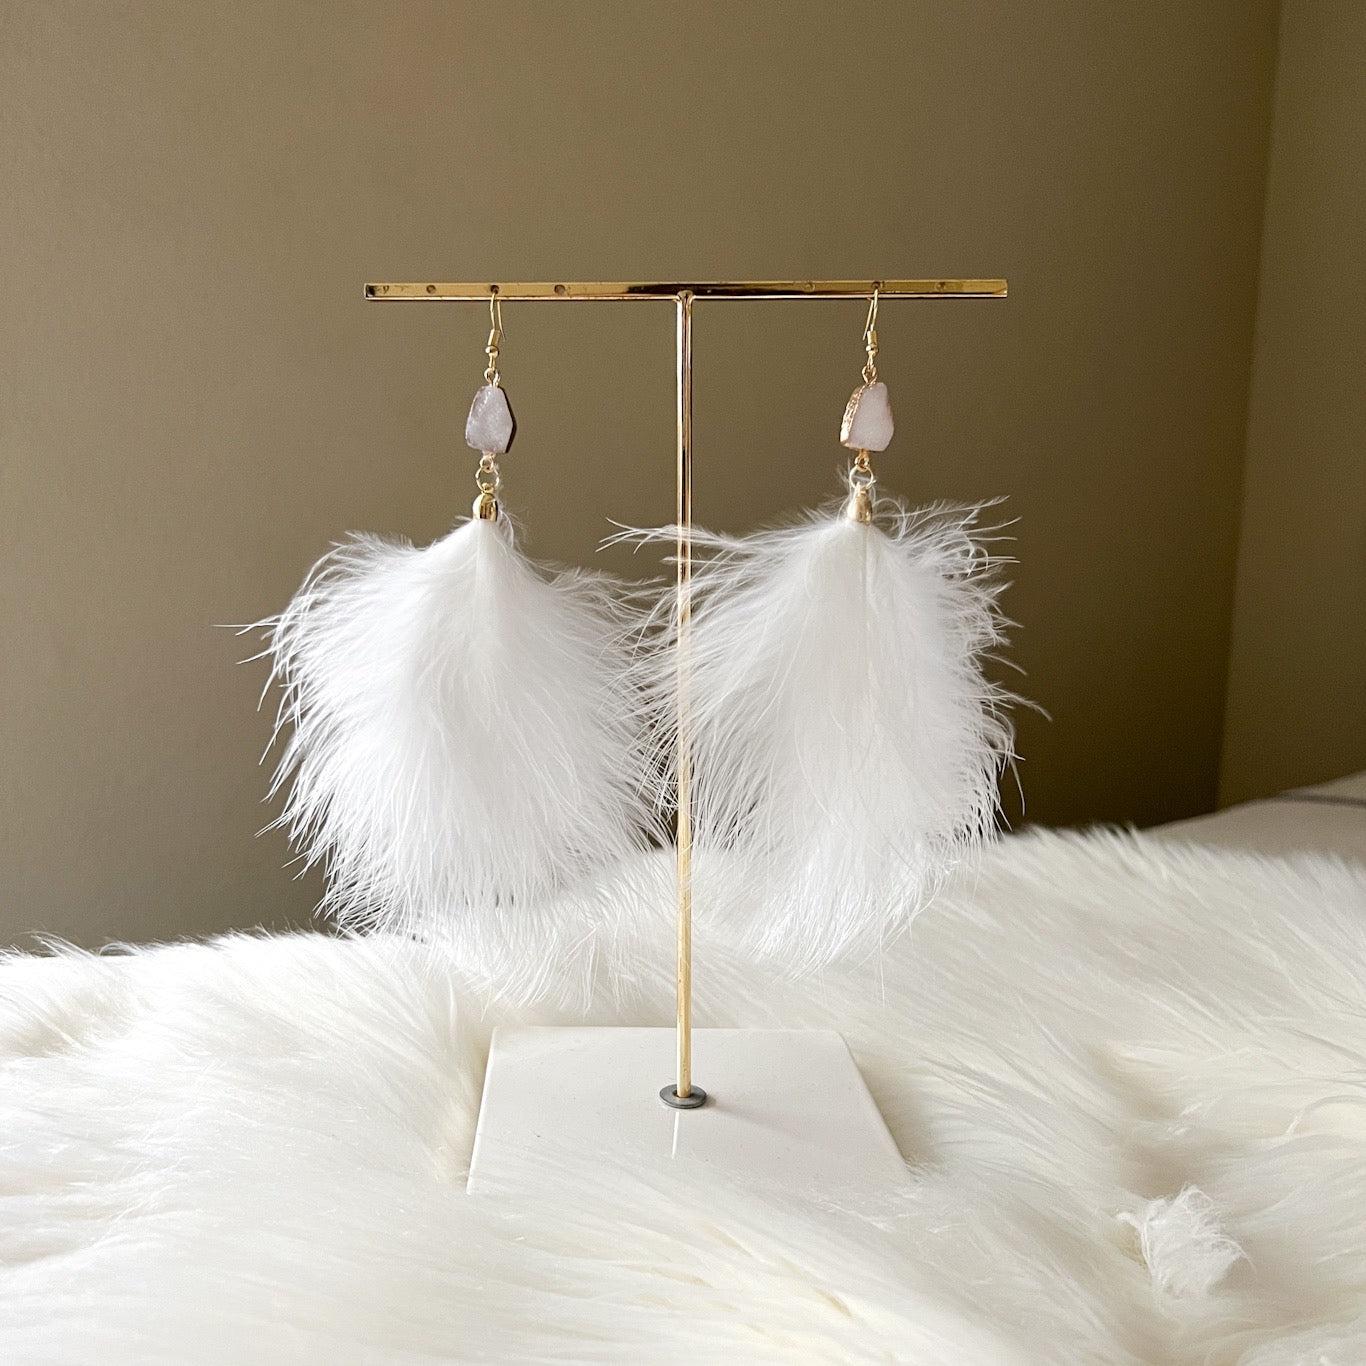 Ostrich Feather Earrings | Handmade by Libby & Smee